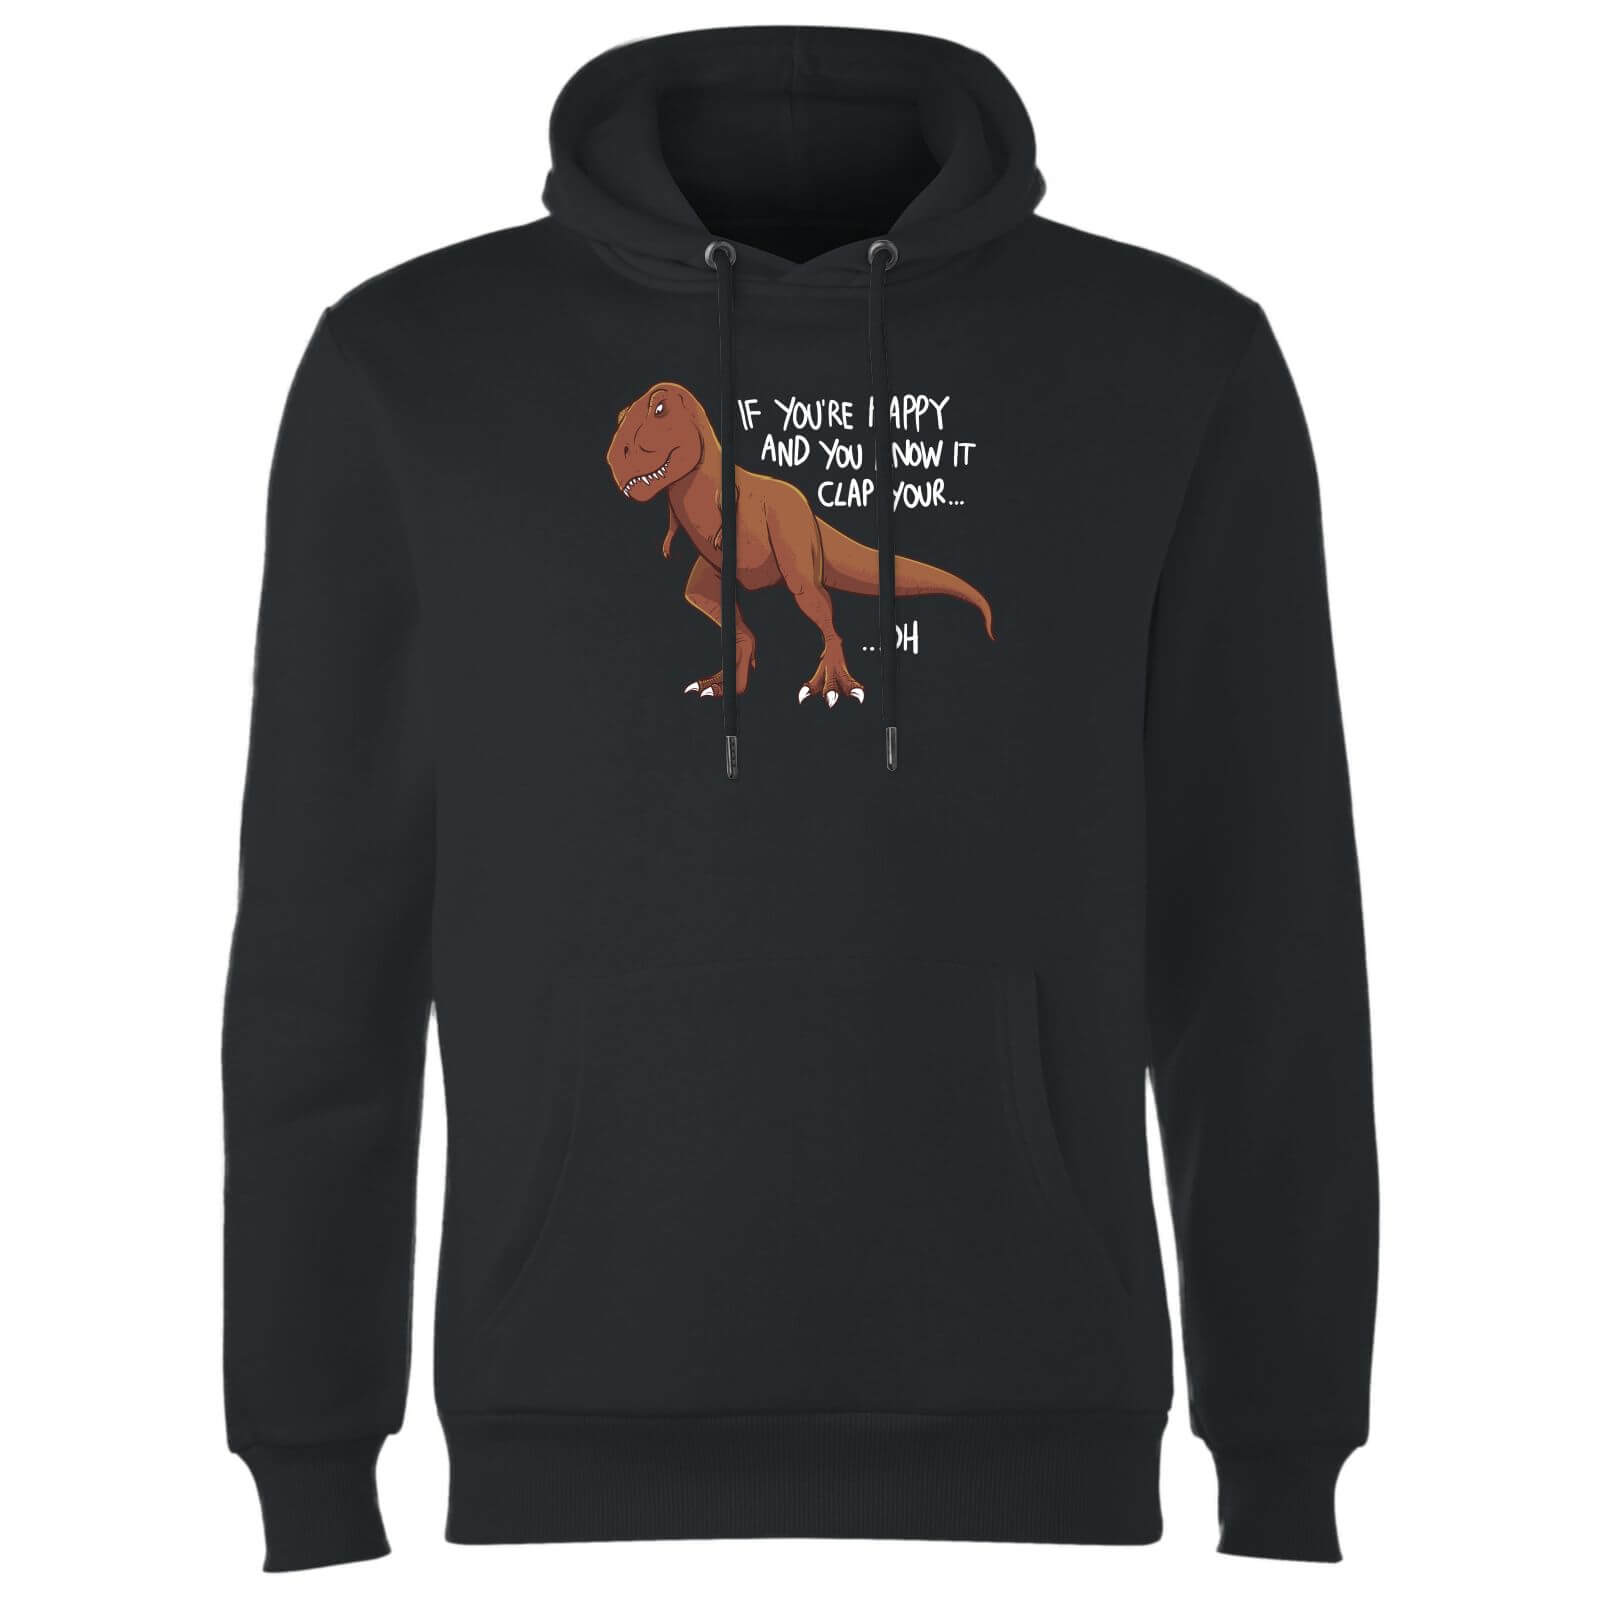 If You're Happy And You Know It Hoodie - Black - L - Black